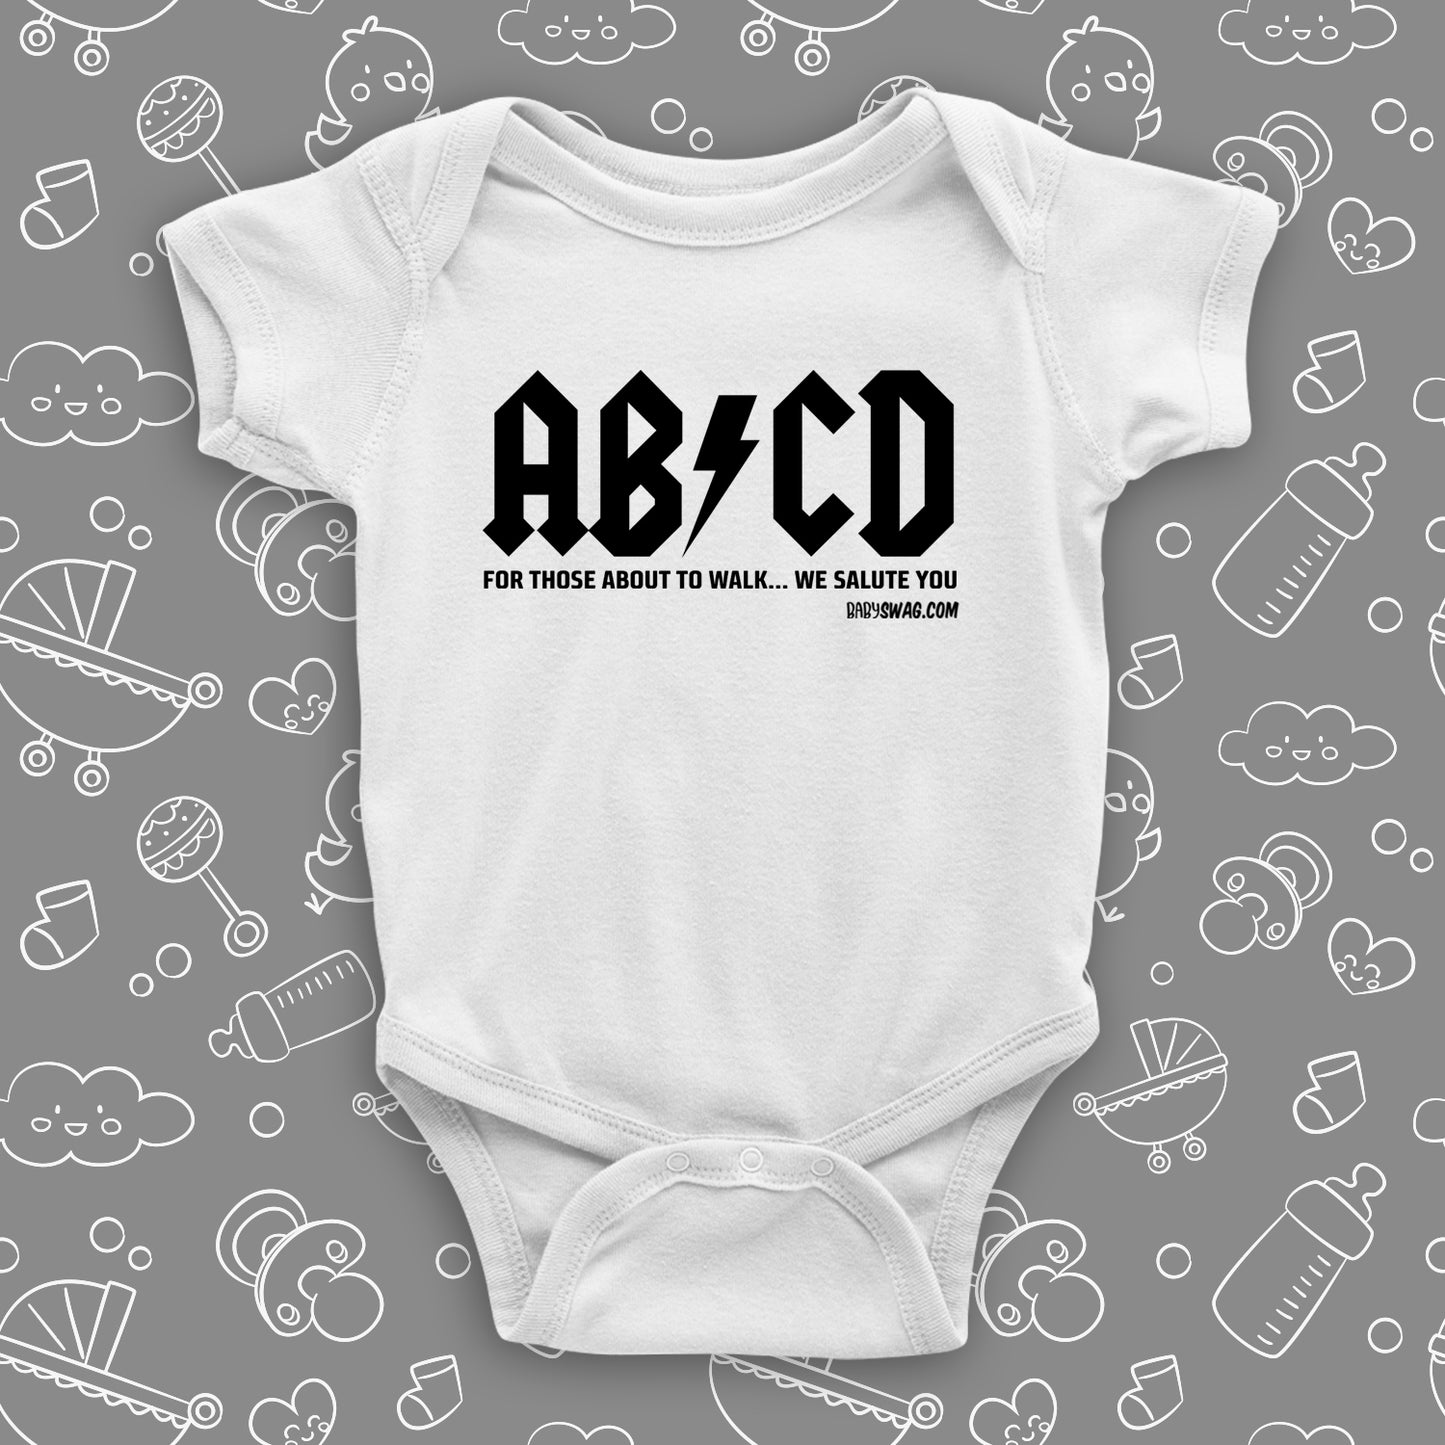 The rock n roll onesies with saying "ABCD" in white.